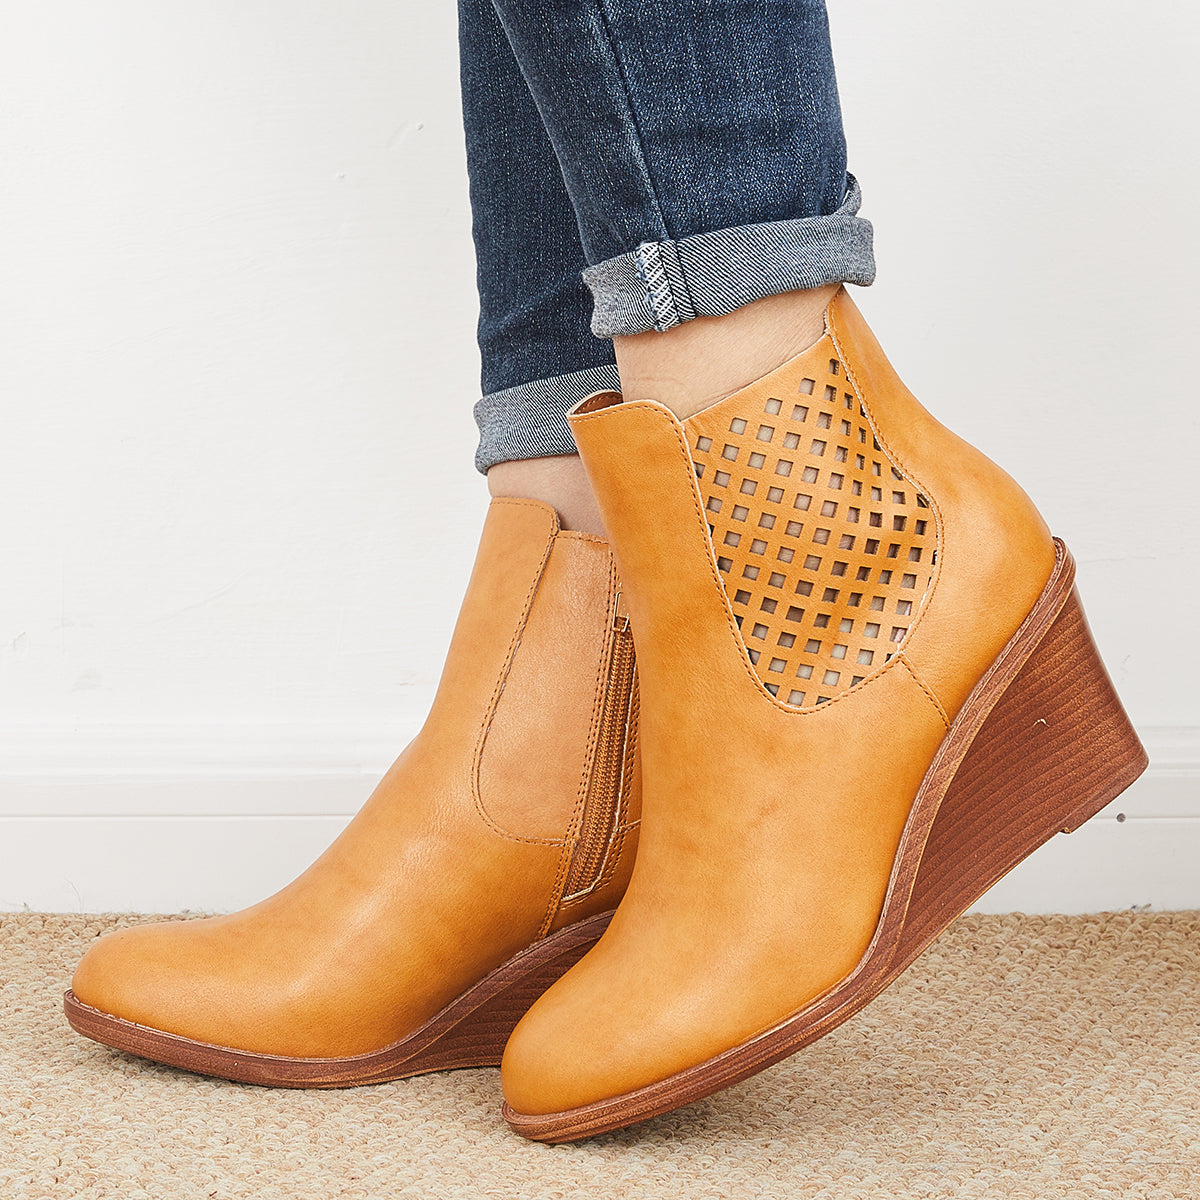 Veooy Hollow Ankle Boots Closed Toe Stacked Wedge Heel Booties